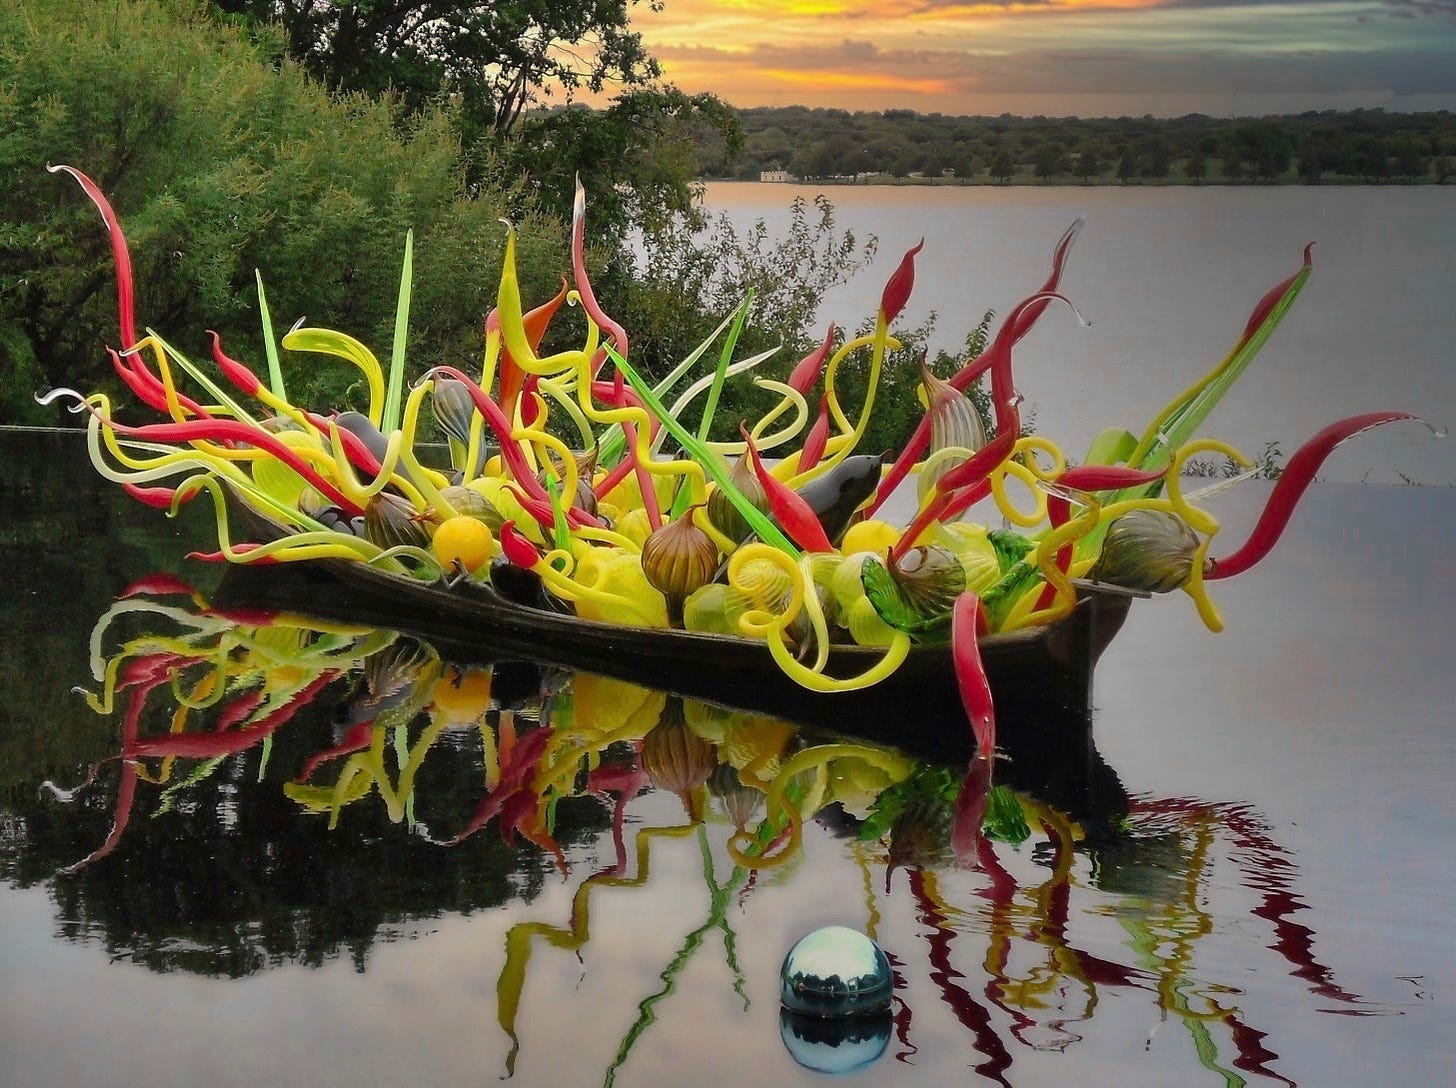 A Don Chihuly sculpture of blown glass in orange, yellow, red, lime green in various shaes of globes and long speindles hanging from a flat bottom boat on a lake with the reflection in the foreground and the setting sun behind clouds in the background